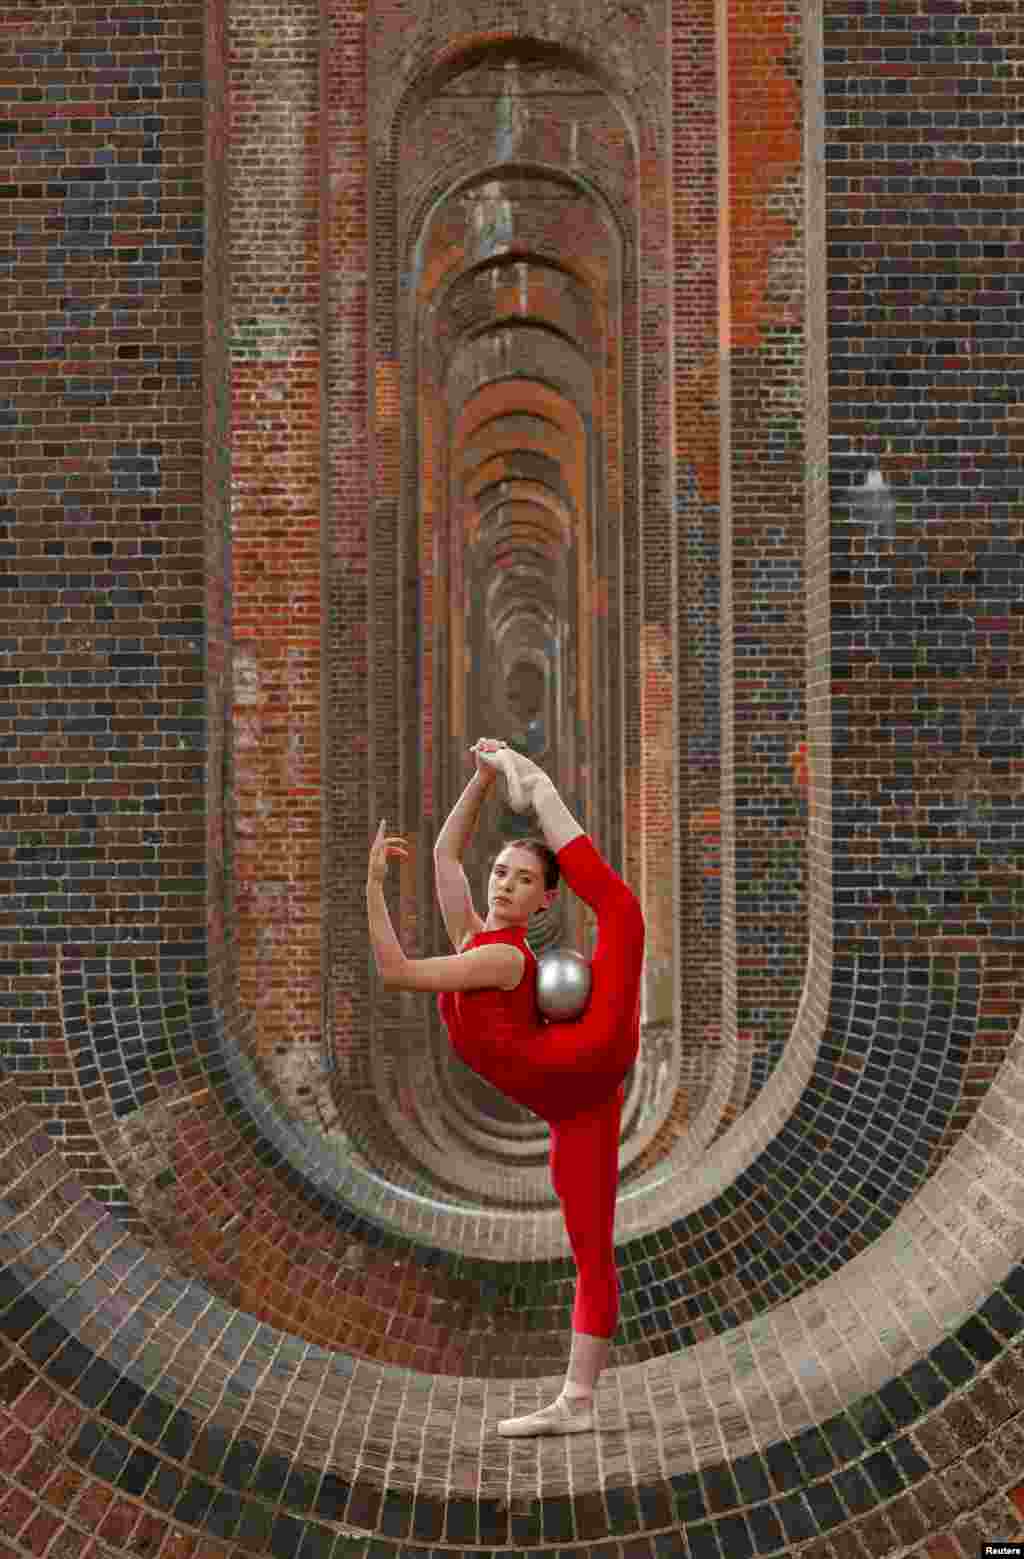 Former Team GB Rhythmic Gymnastic star and dancer Hannah Martin during a training session at Ouse Valley Viaduct in Sussex, Britain.